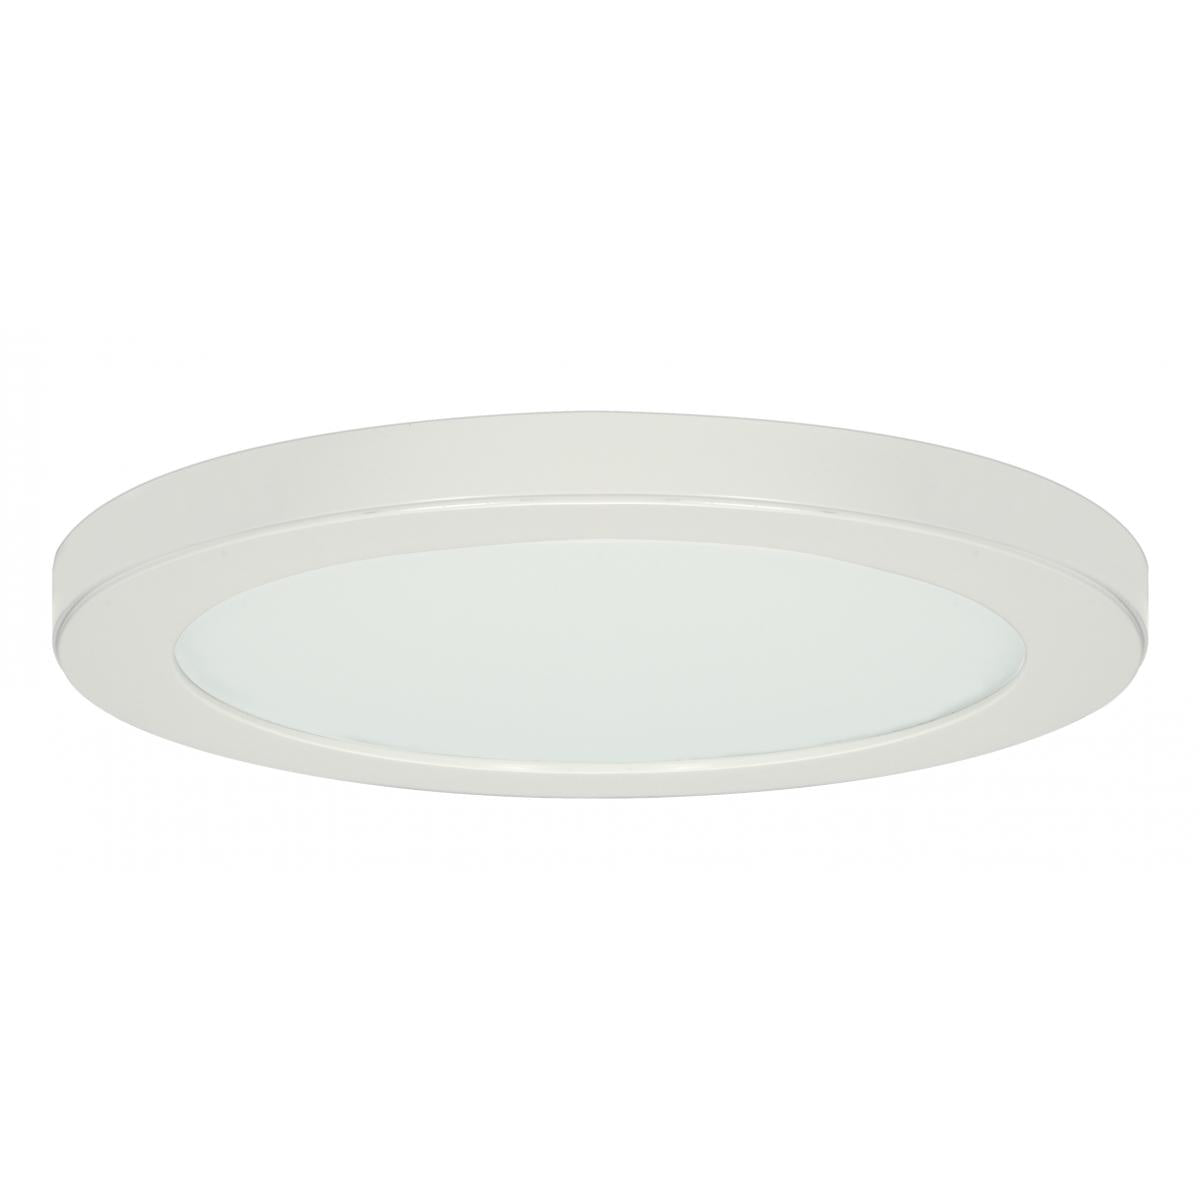 SATCO-S29650SATCO S29650 25W 13" Round LED Surface Mount 30K